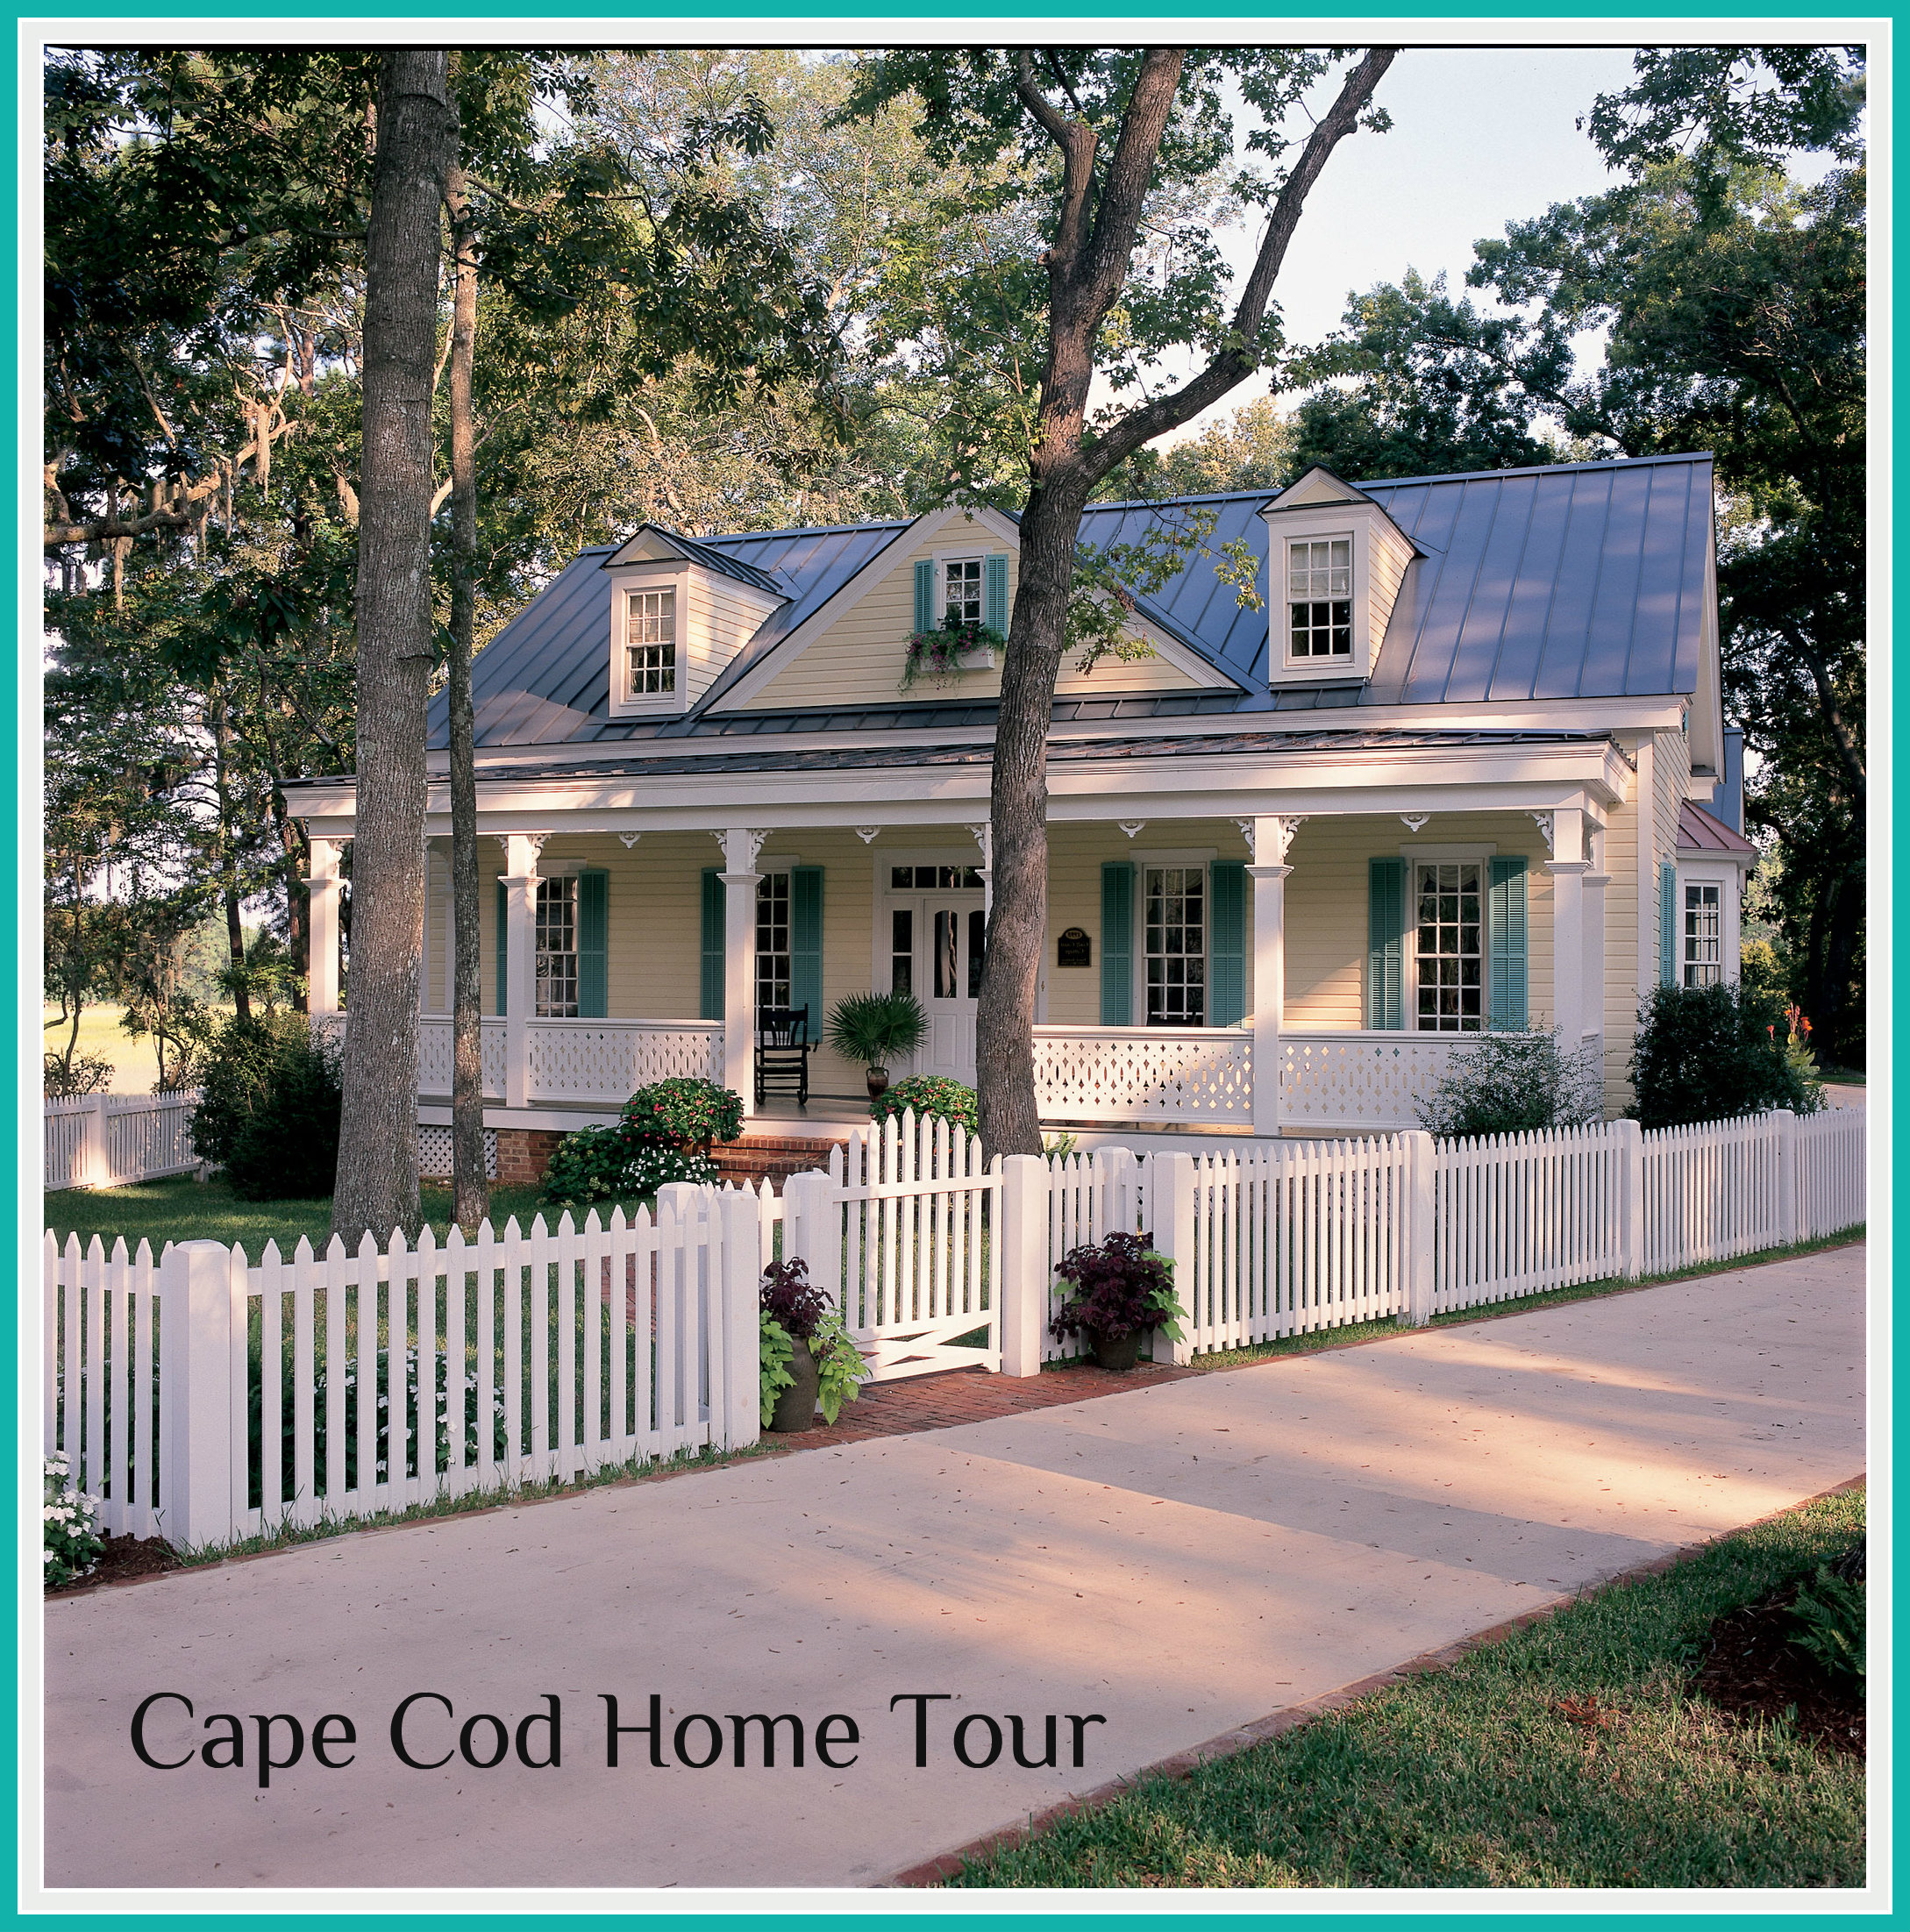 Cape Cod Home & Old Key West House